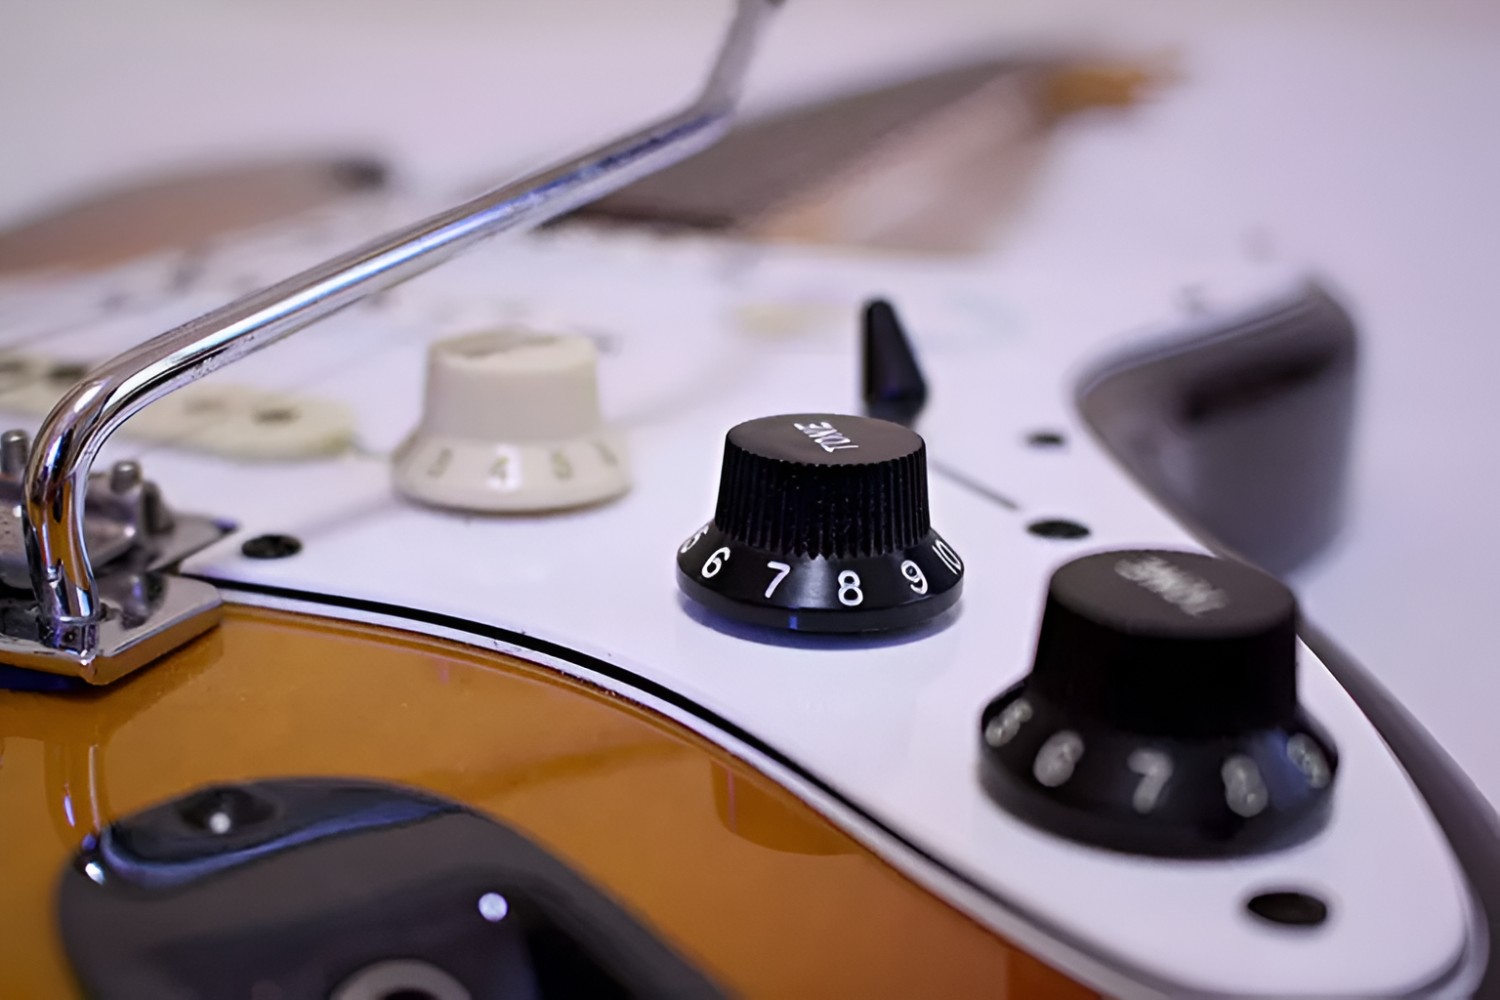 Amp: What To Set The Knobs To For Electric Guitar